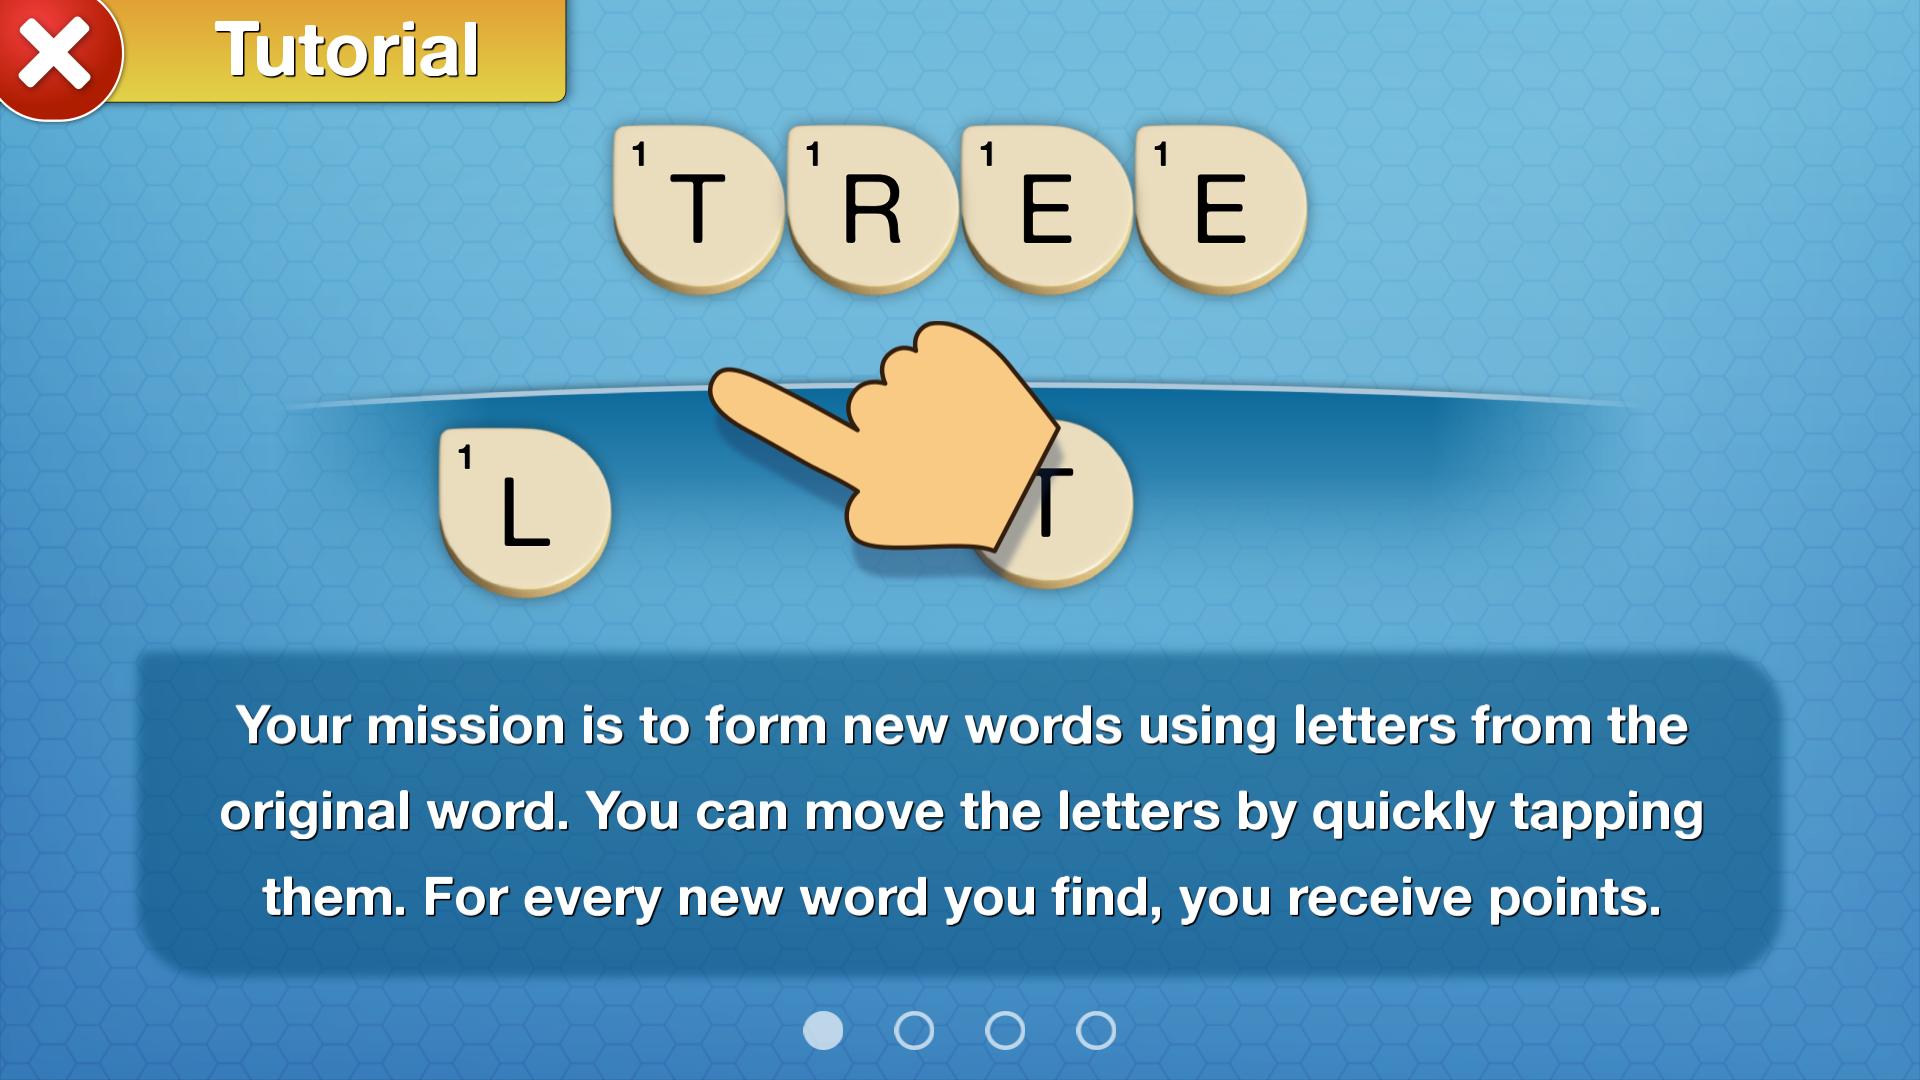 7 words game. Fast for Word программа. Fast for Word на русском. Word games. Play on Words.